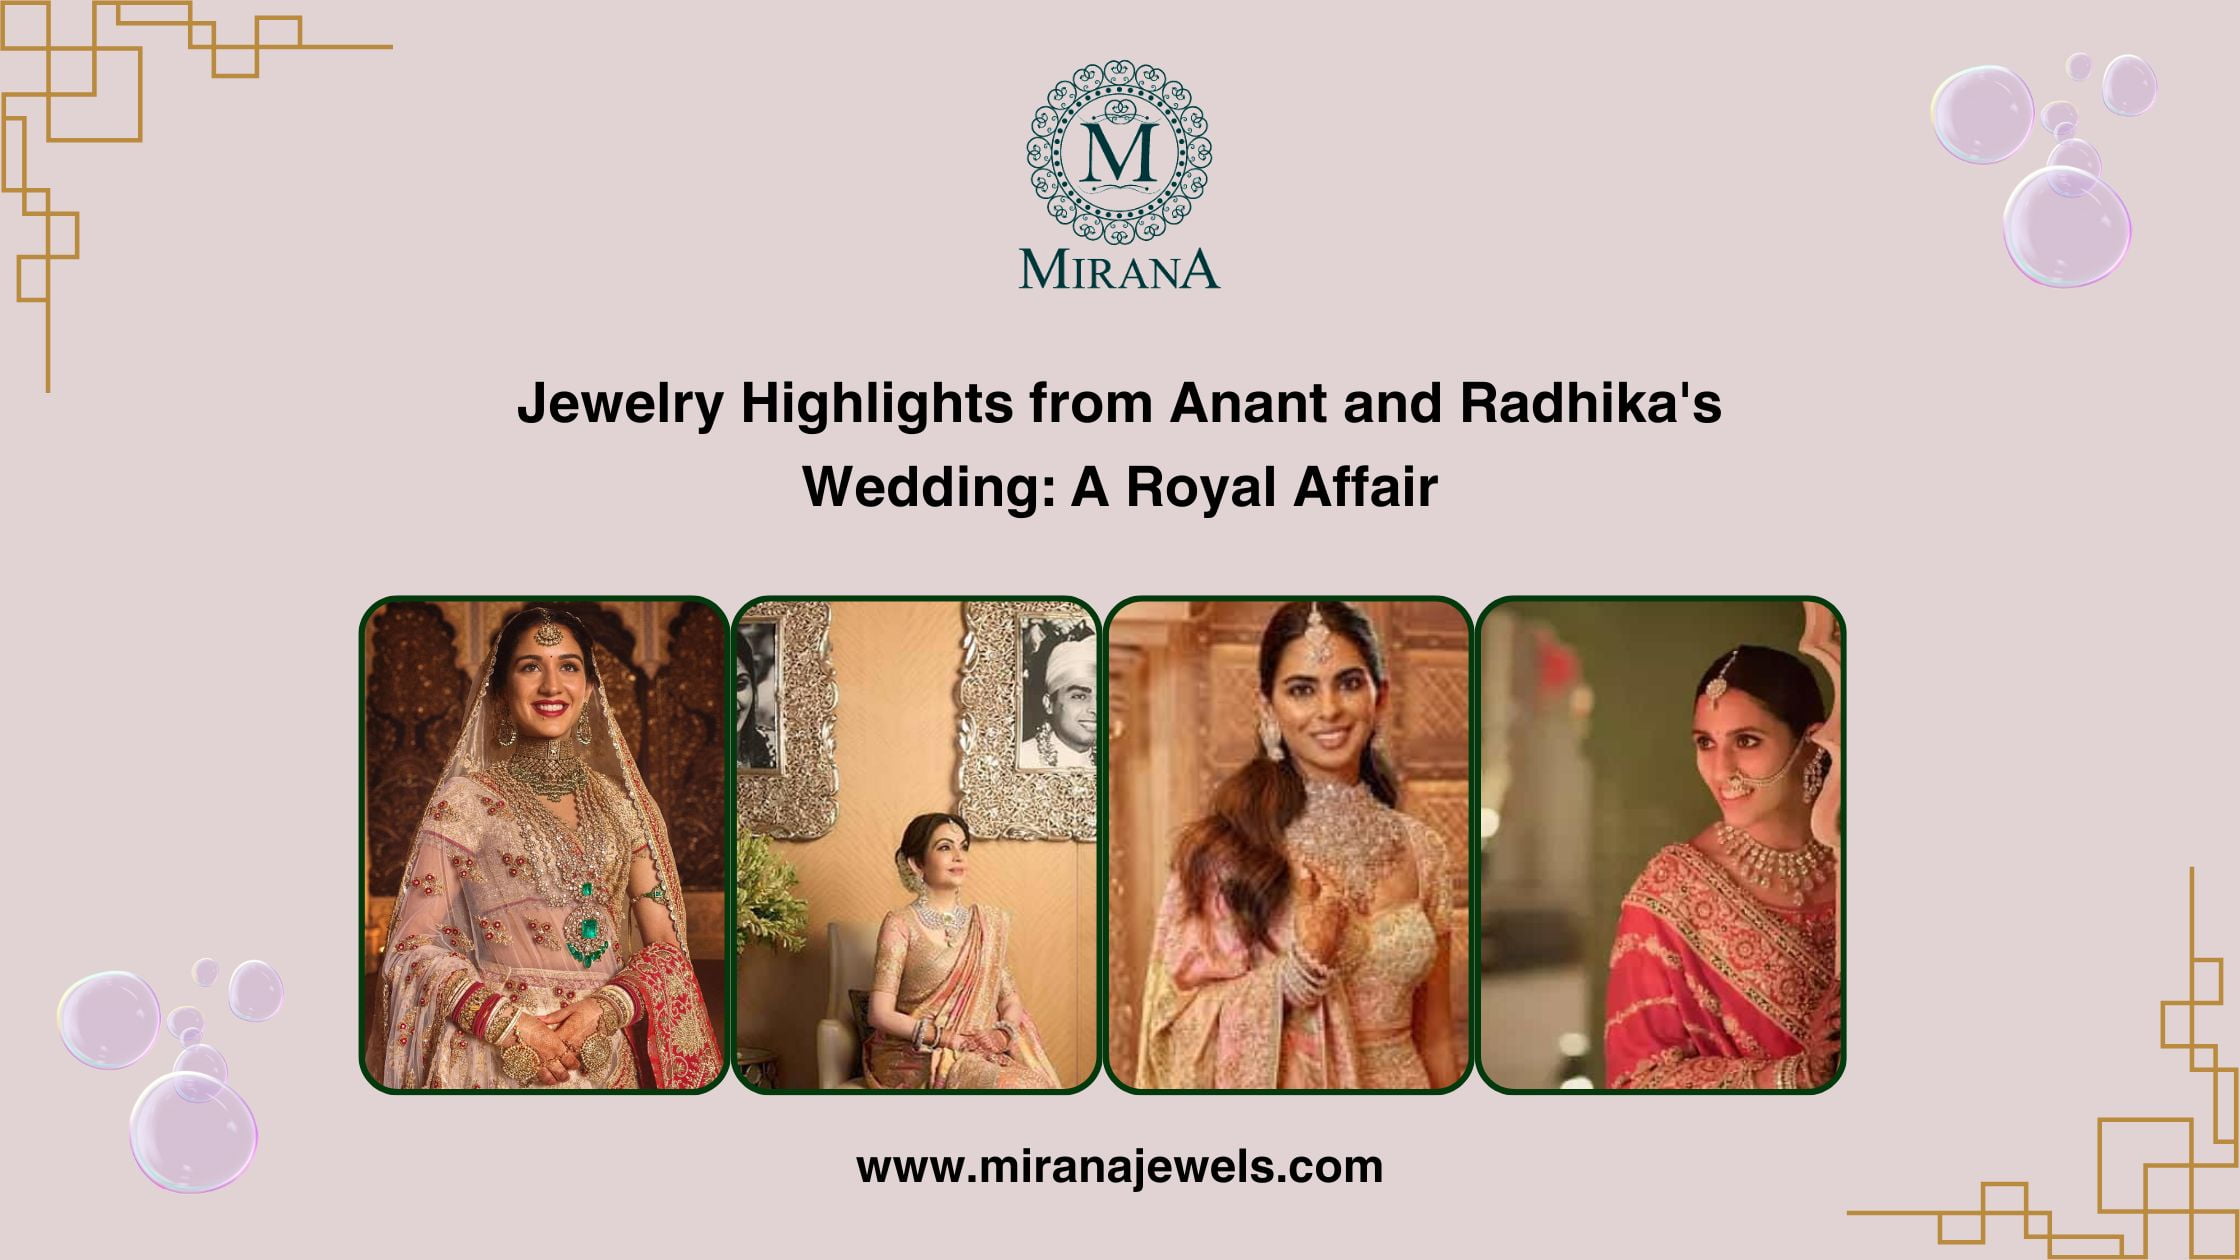 Jewelry Highlights from Anant and Radhika's Wedding: A Royal Affair